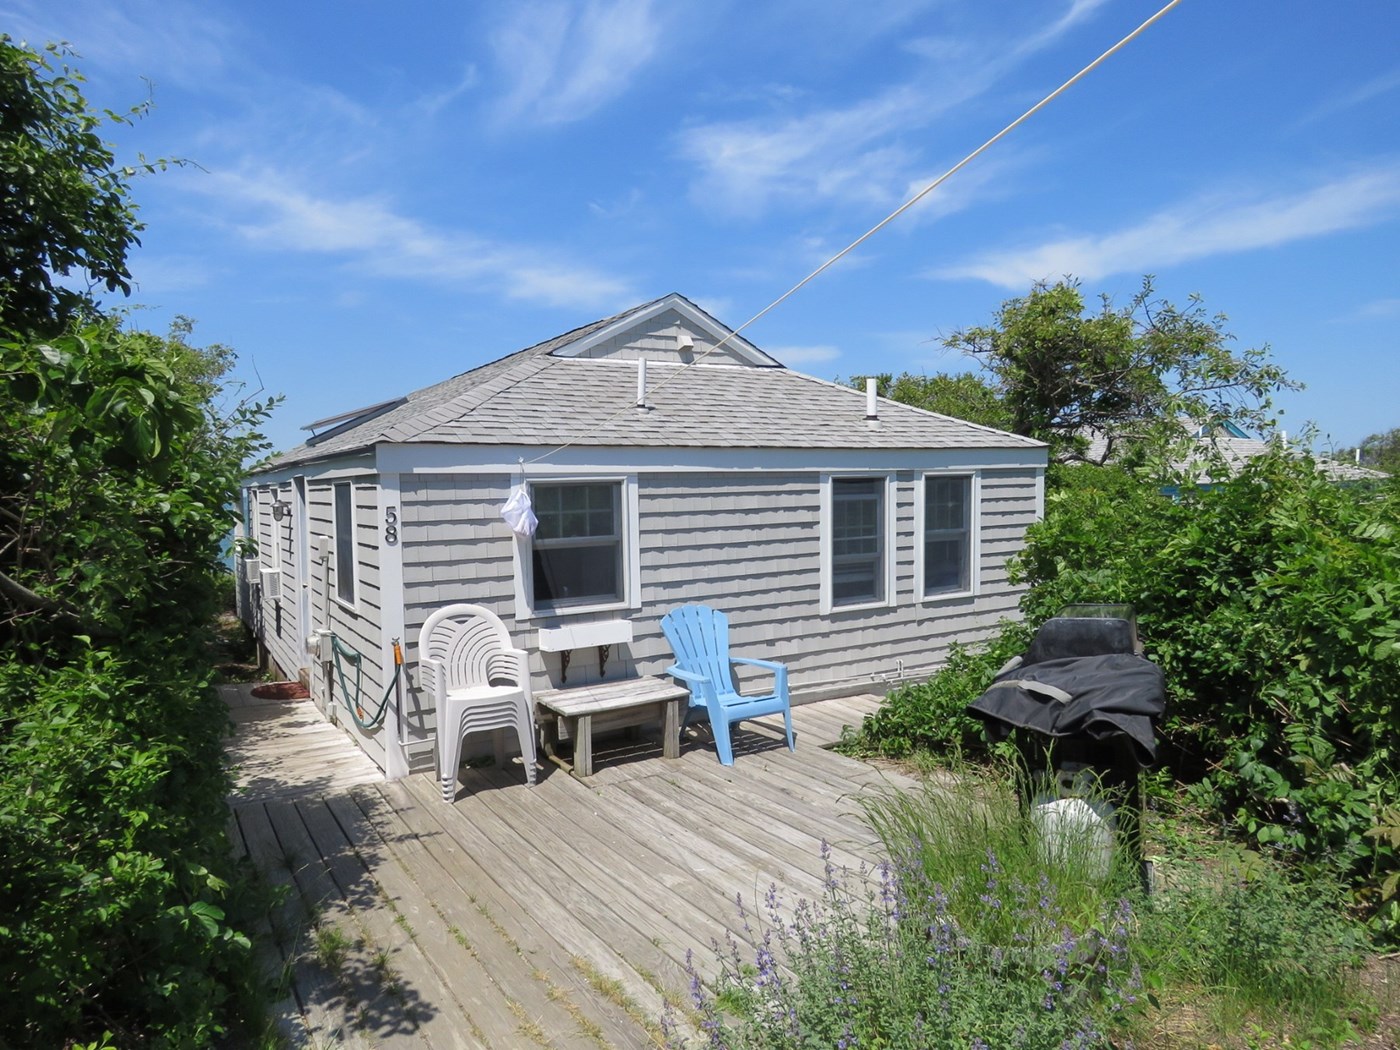 Brewster Vacation Rental home in Cape Cod MA 02631 